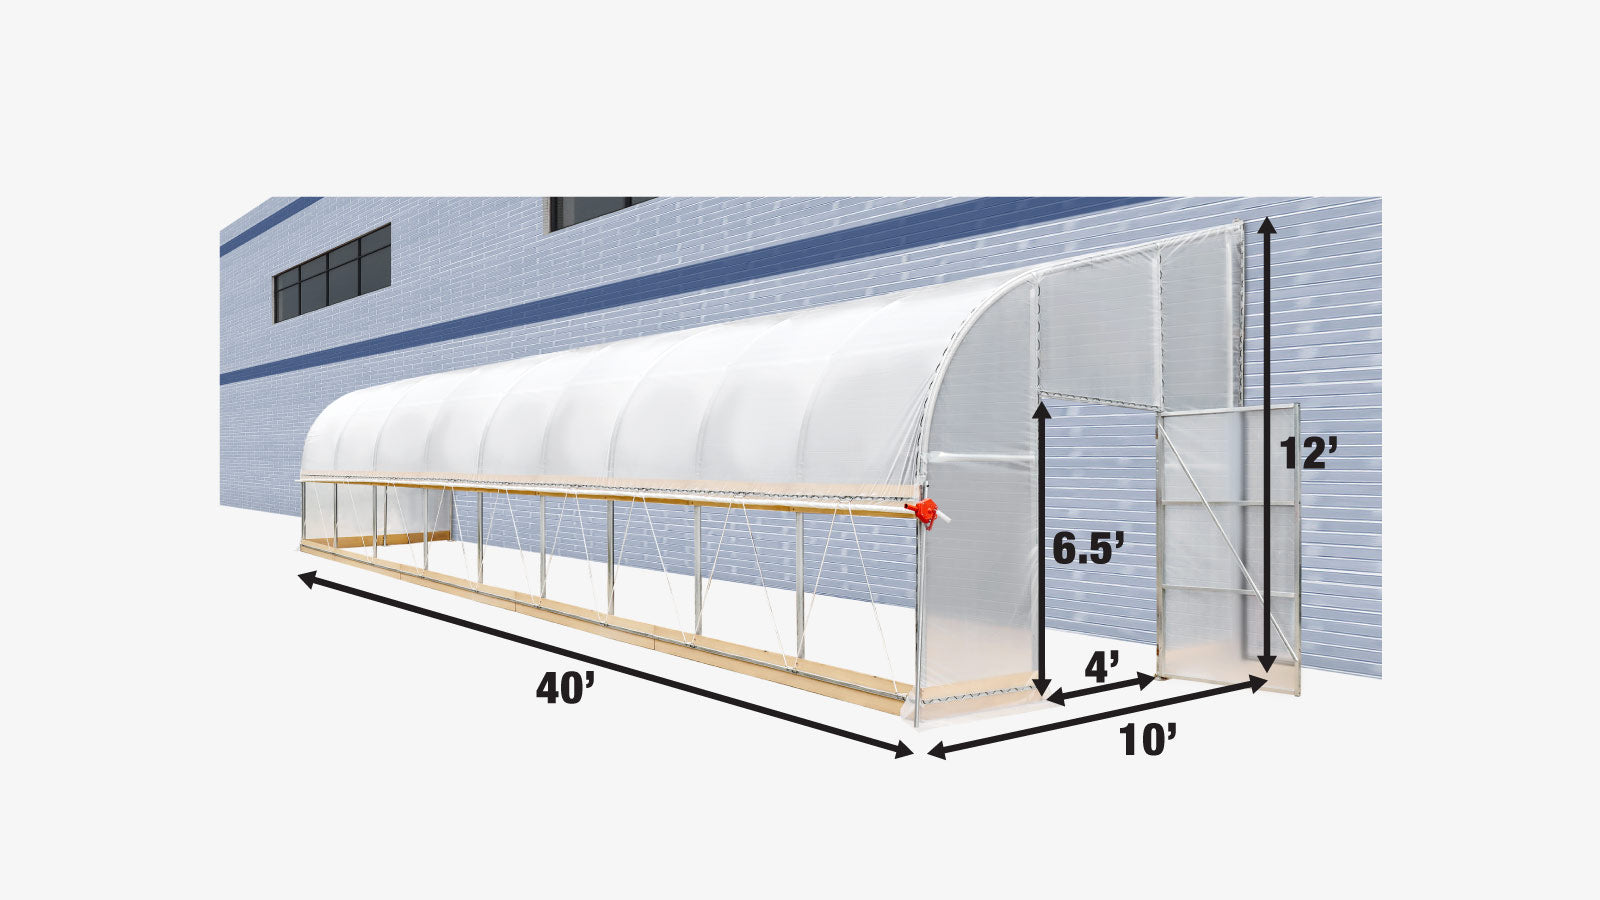 TMG Industrial 10' x 40' Lean-To Greenhouse Grow Tent w/6 Mil Clear EVA Plastic Film, Cold Frame, Manivelle Roll-Up Side, 6-½' Sidewall, TMG-GHL1040-specifications-image